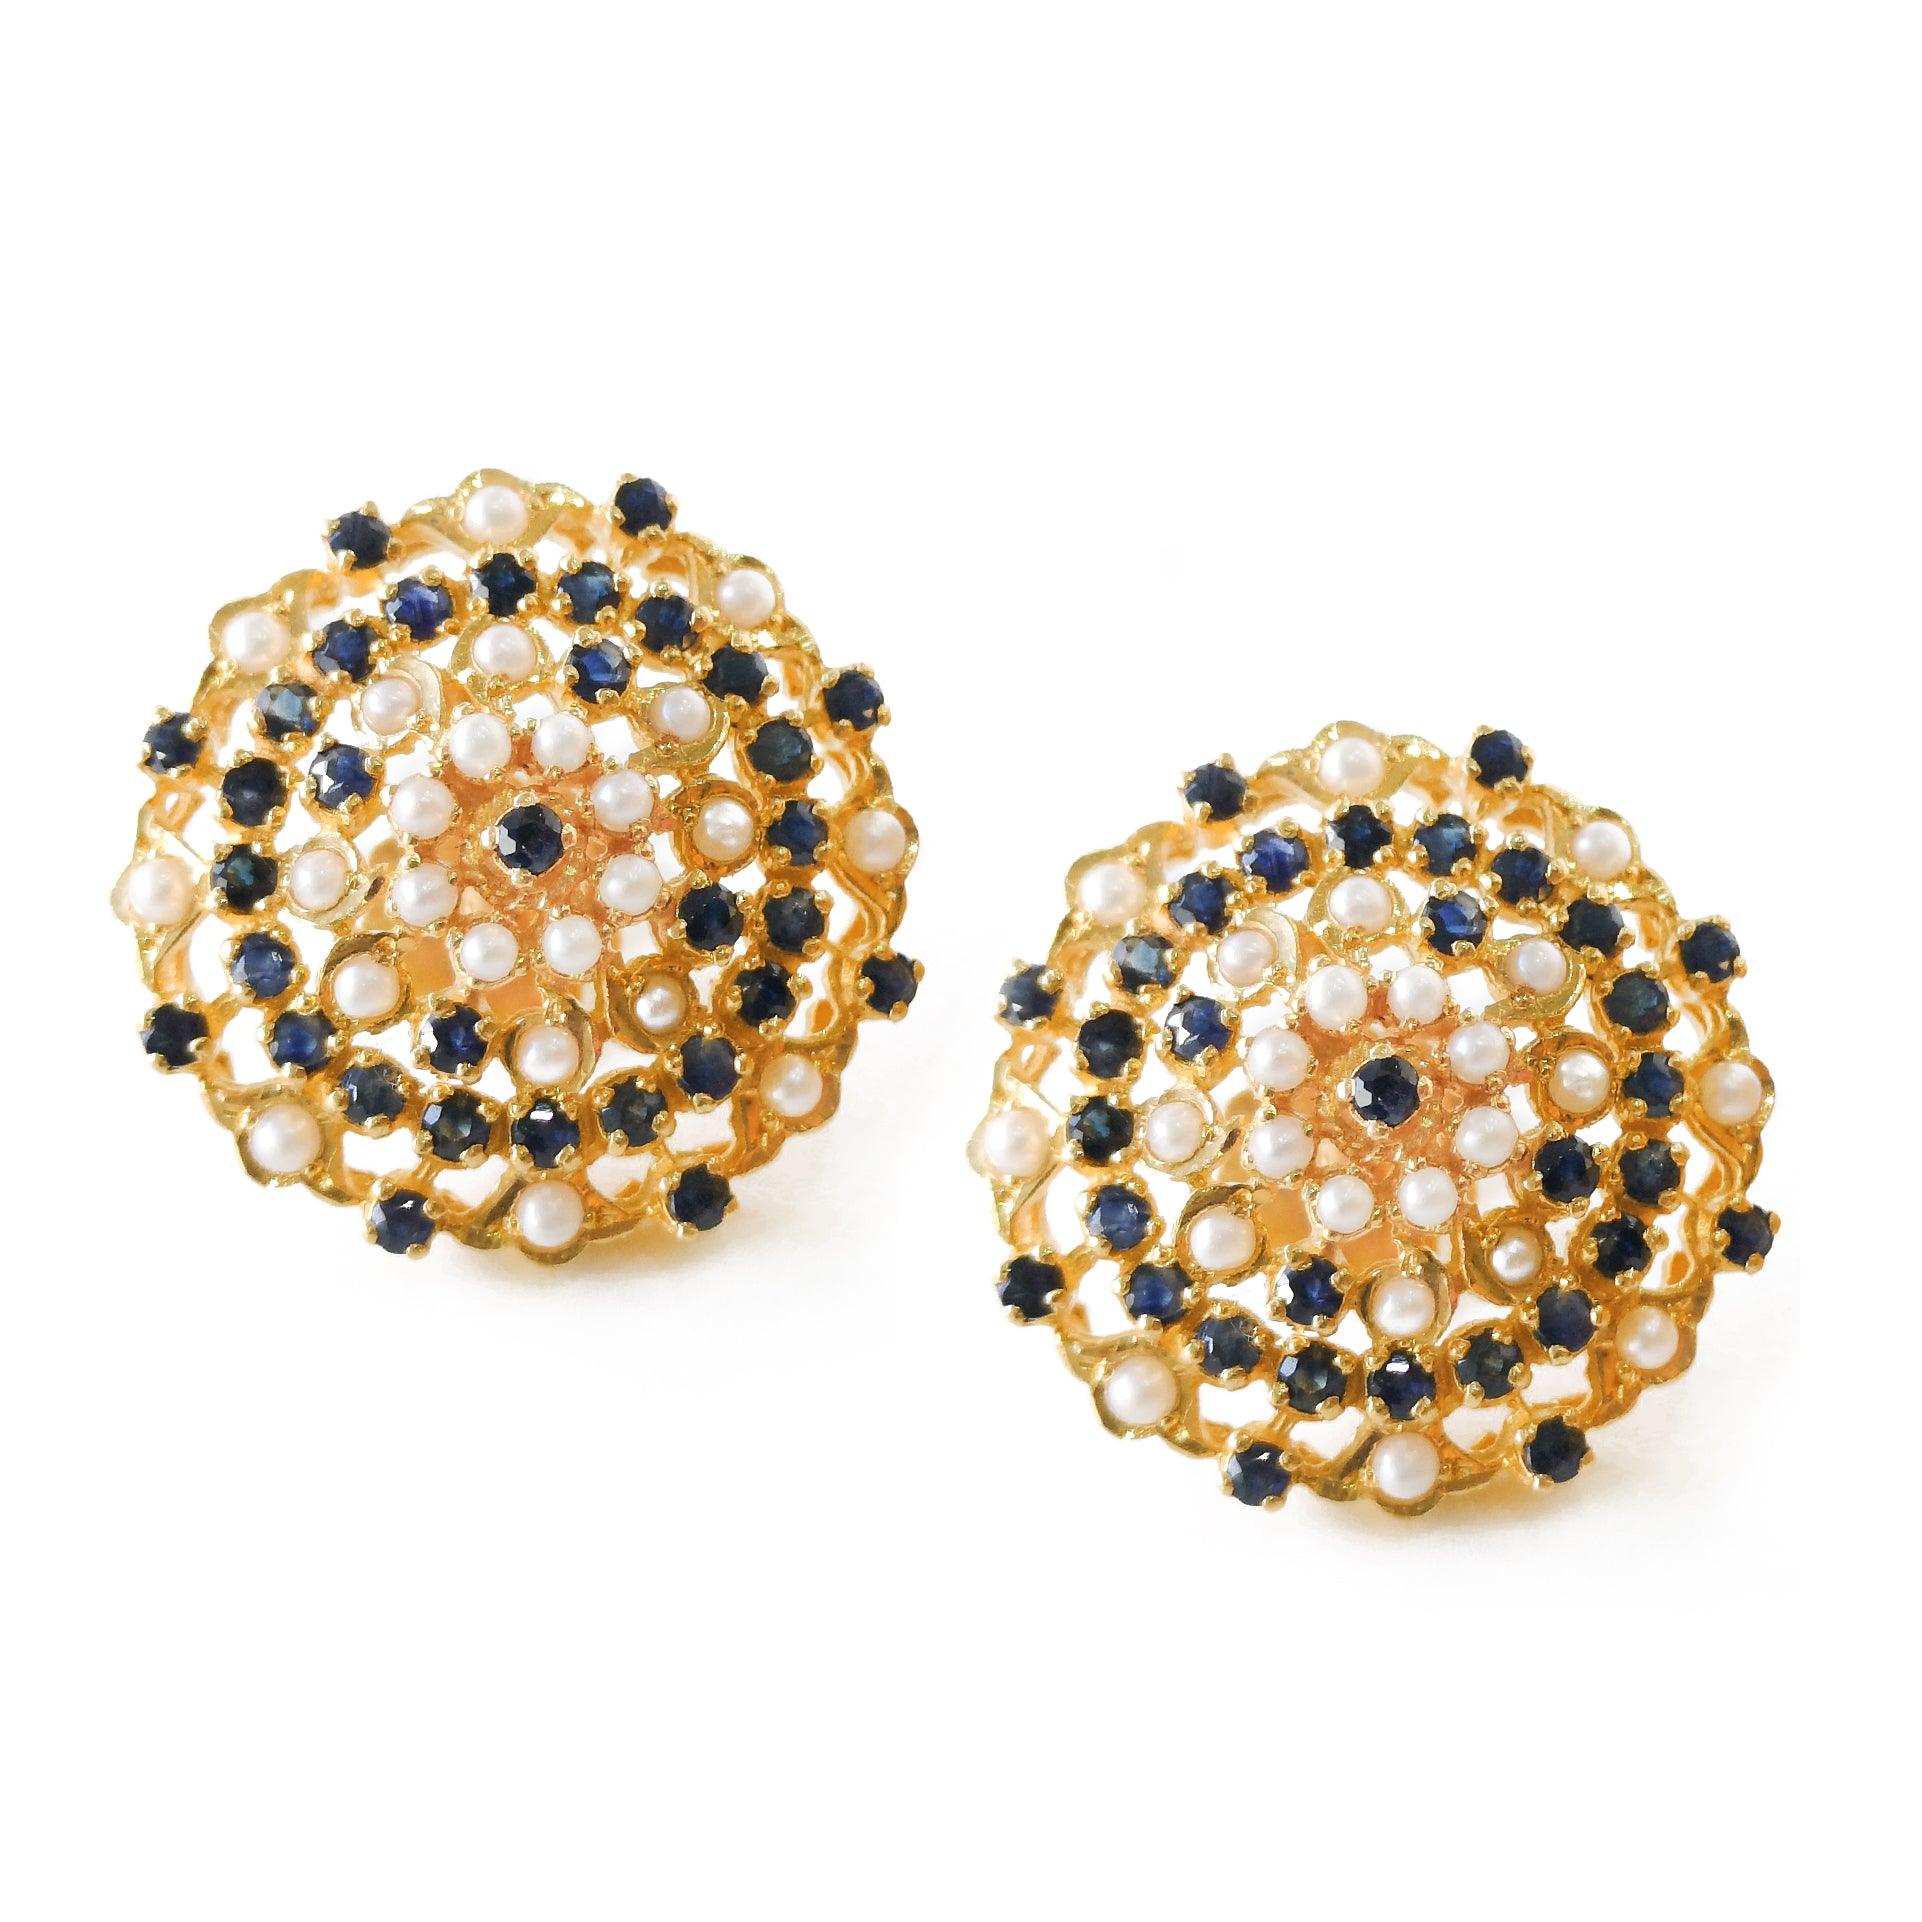 22ct Gold Stud Earrings set with Black Stones and Synthetic Pearls (17g) E-4172 - Minar Jewellers